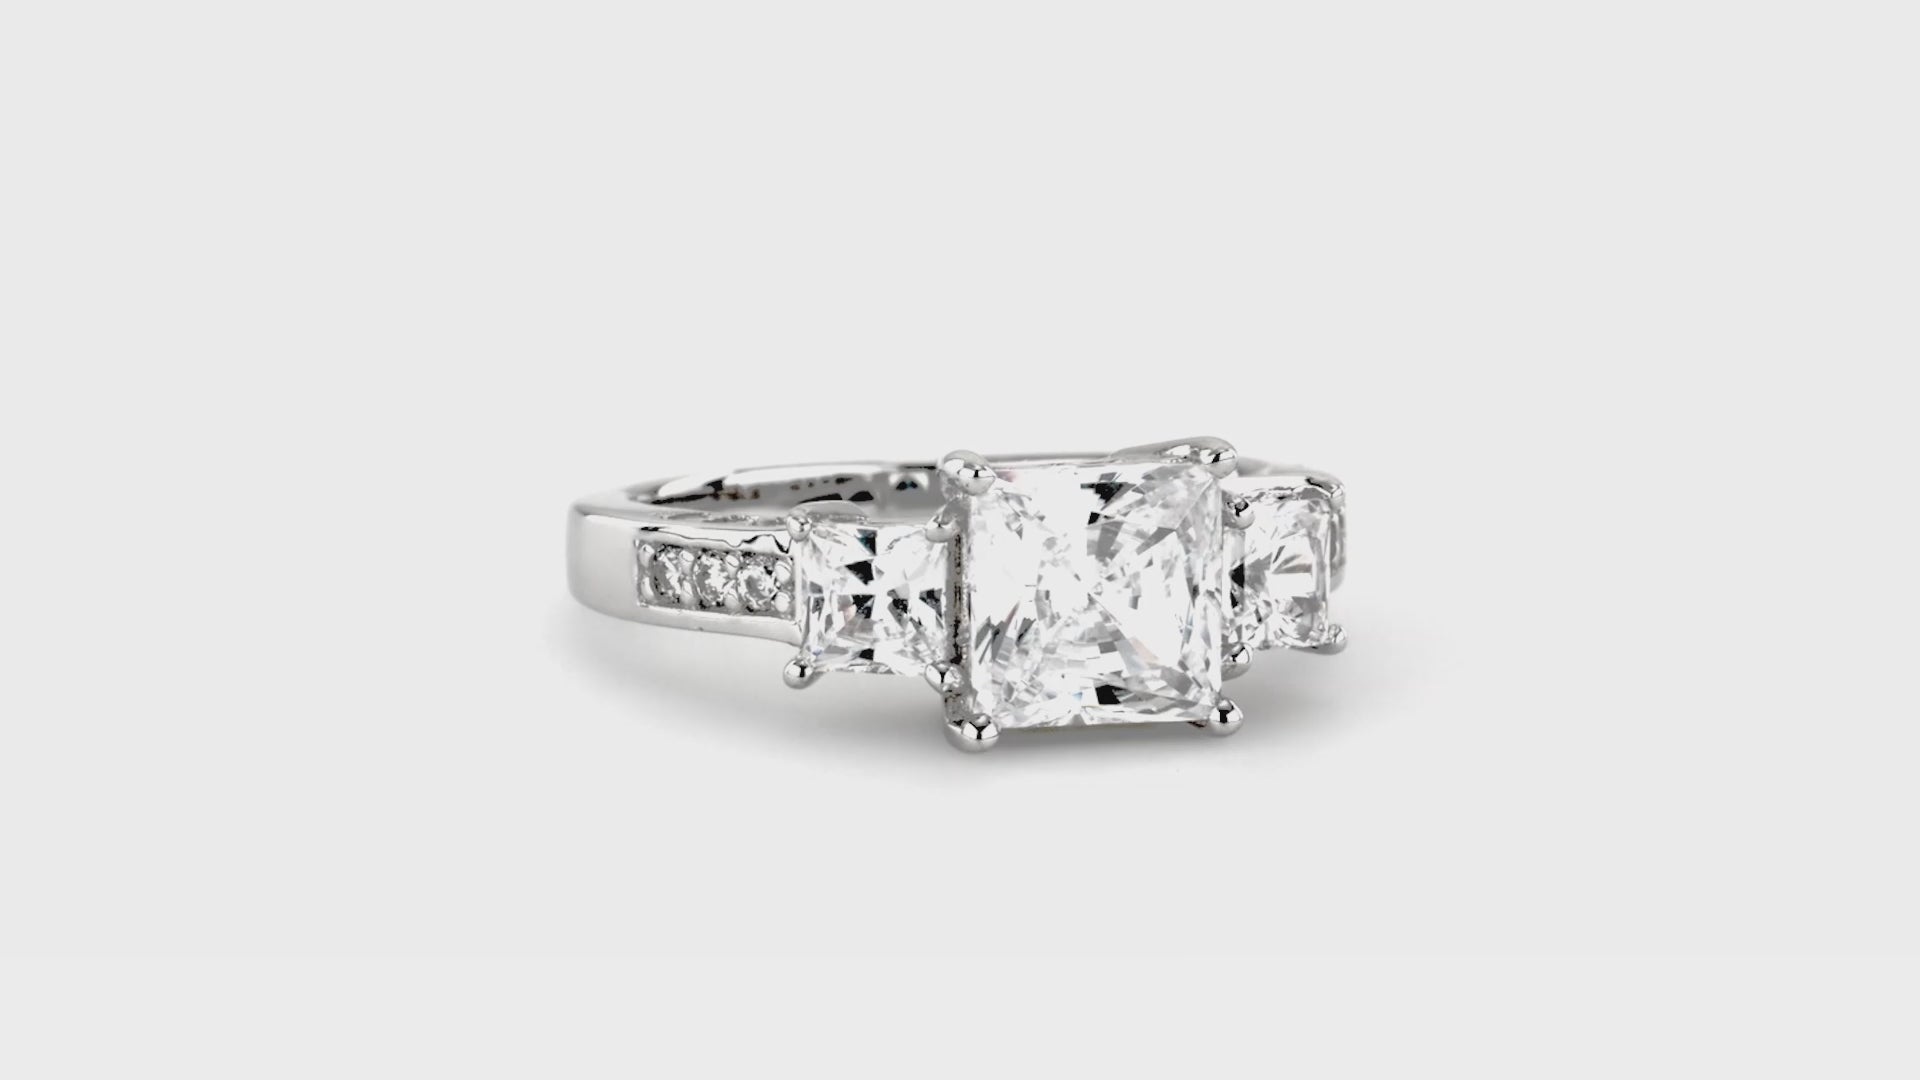 Video Contains 3-Stone Princess CZ Ring in Sterling Silver. Style Number R617